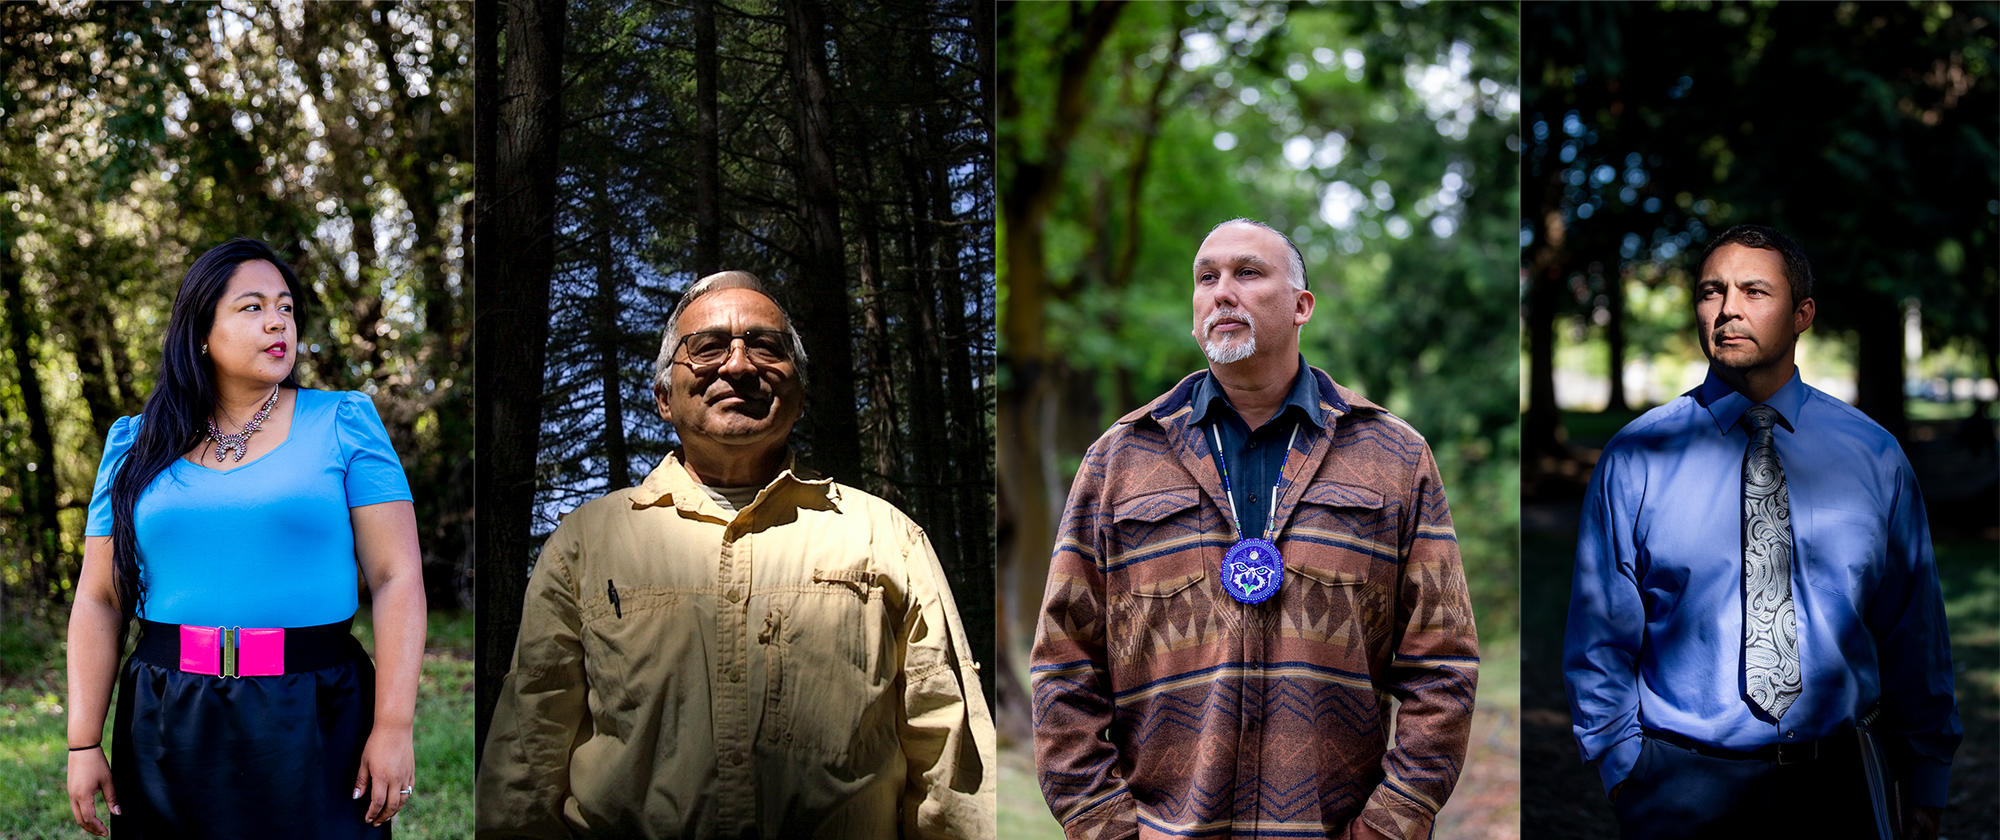 From left, Emily Washines, founder of Native friends. (Photo by Dorothy Edwards/Crosscut) Ernesto Alvarado, research associate professor at the University of Washington. (Photo by Sarah Hoffman/Crosscut) Steve Rigdon, general manager for Yakima Forest Products, and Cody Desautel, Natural Resource Director for the Confederated Tribes of the Colville Reservation. (Photos by Dorothy Edwards/Crosscut)